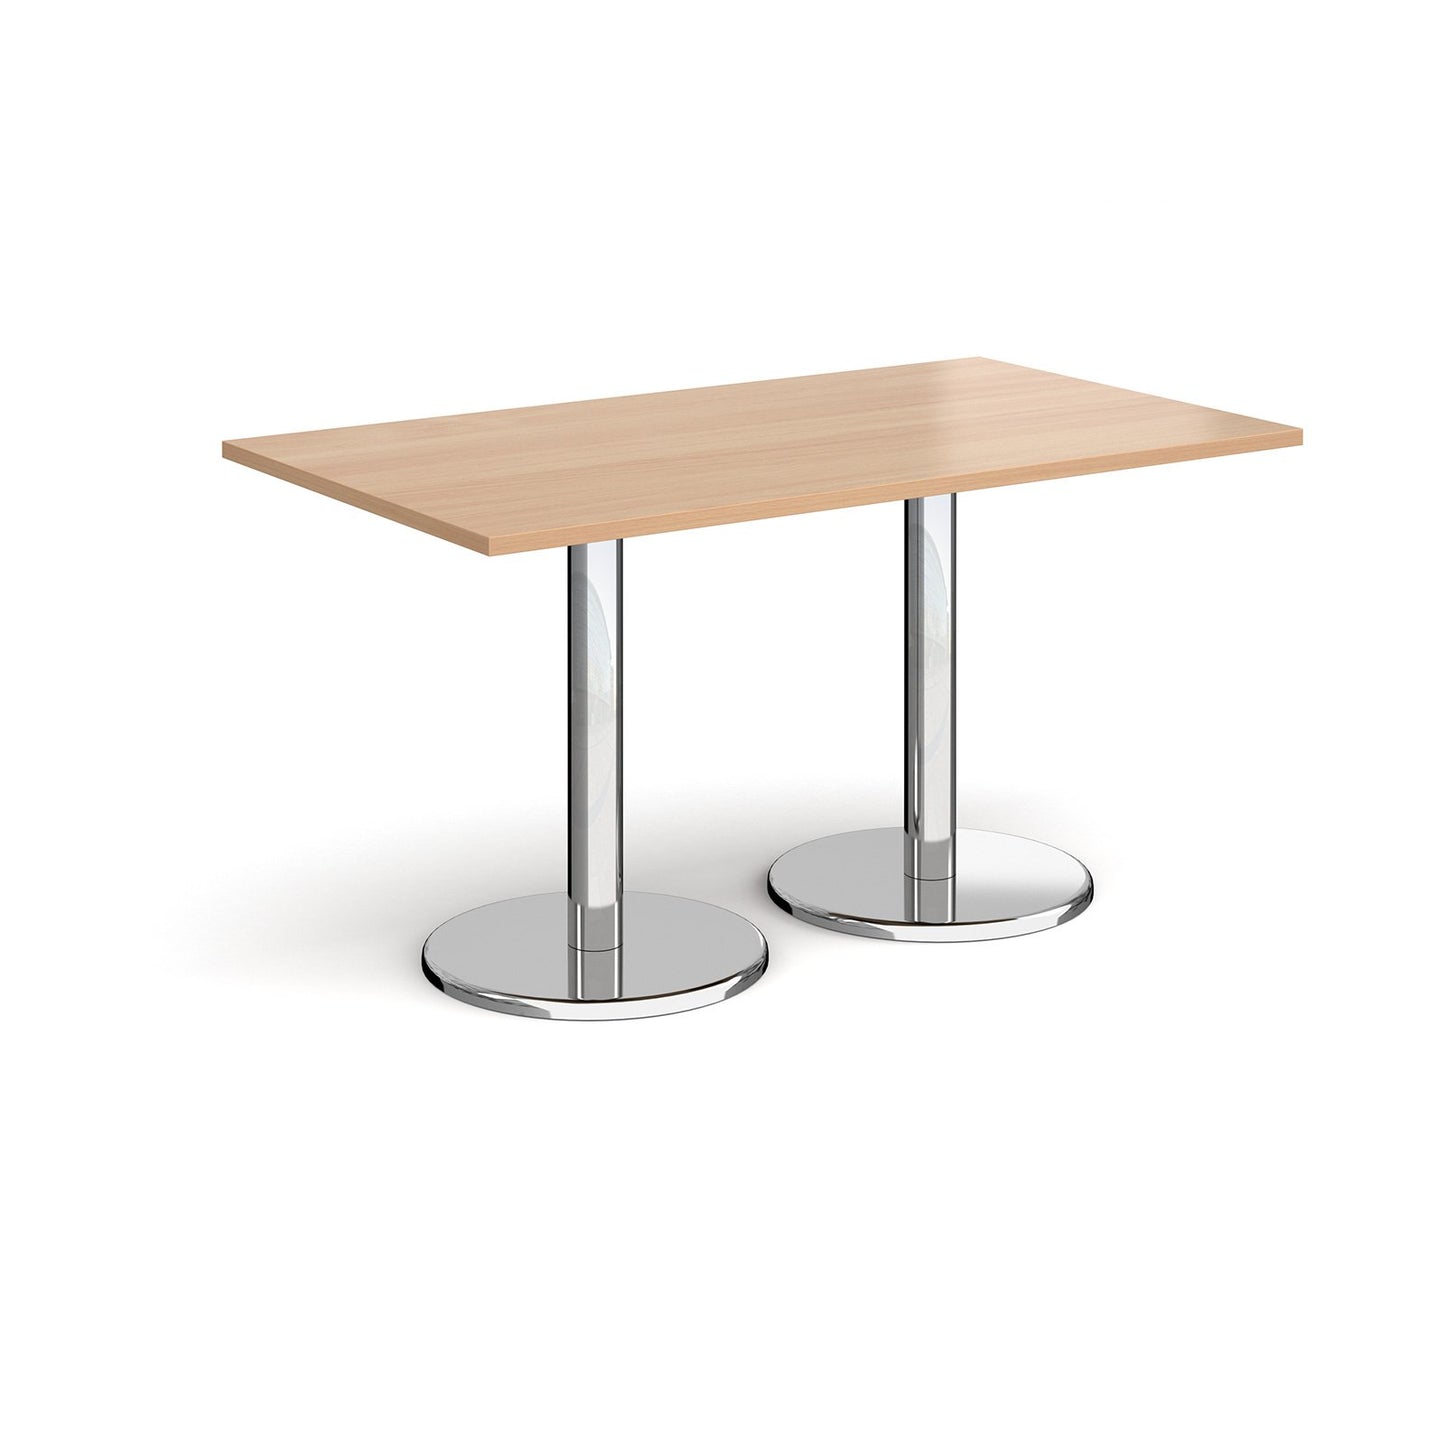 Pisa rectangular dining table with round bases